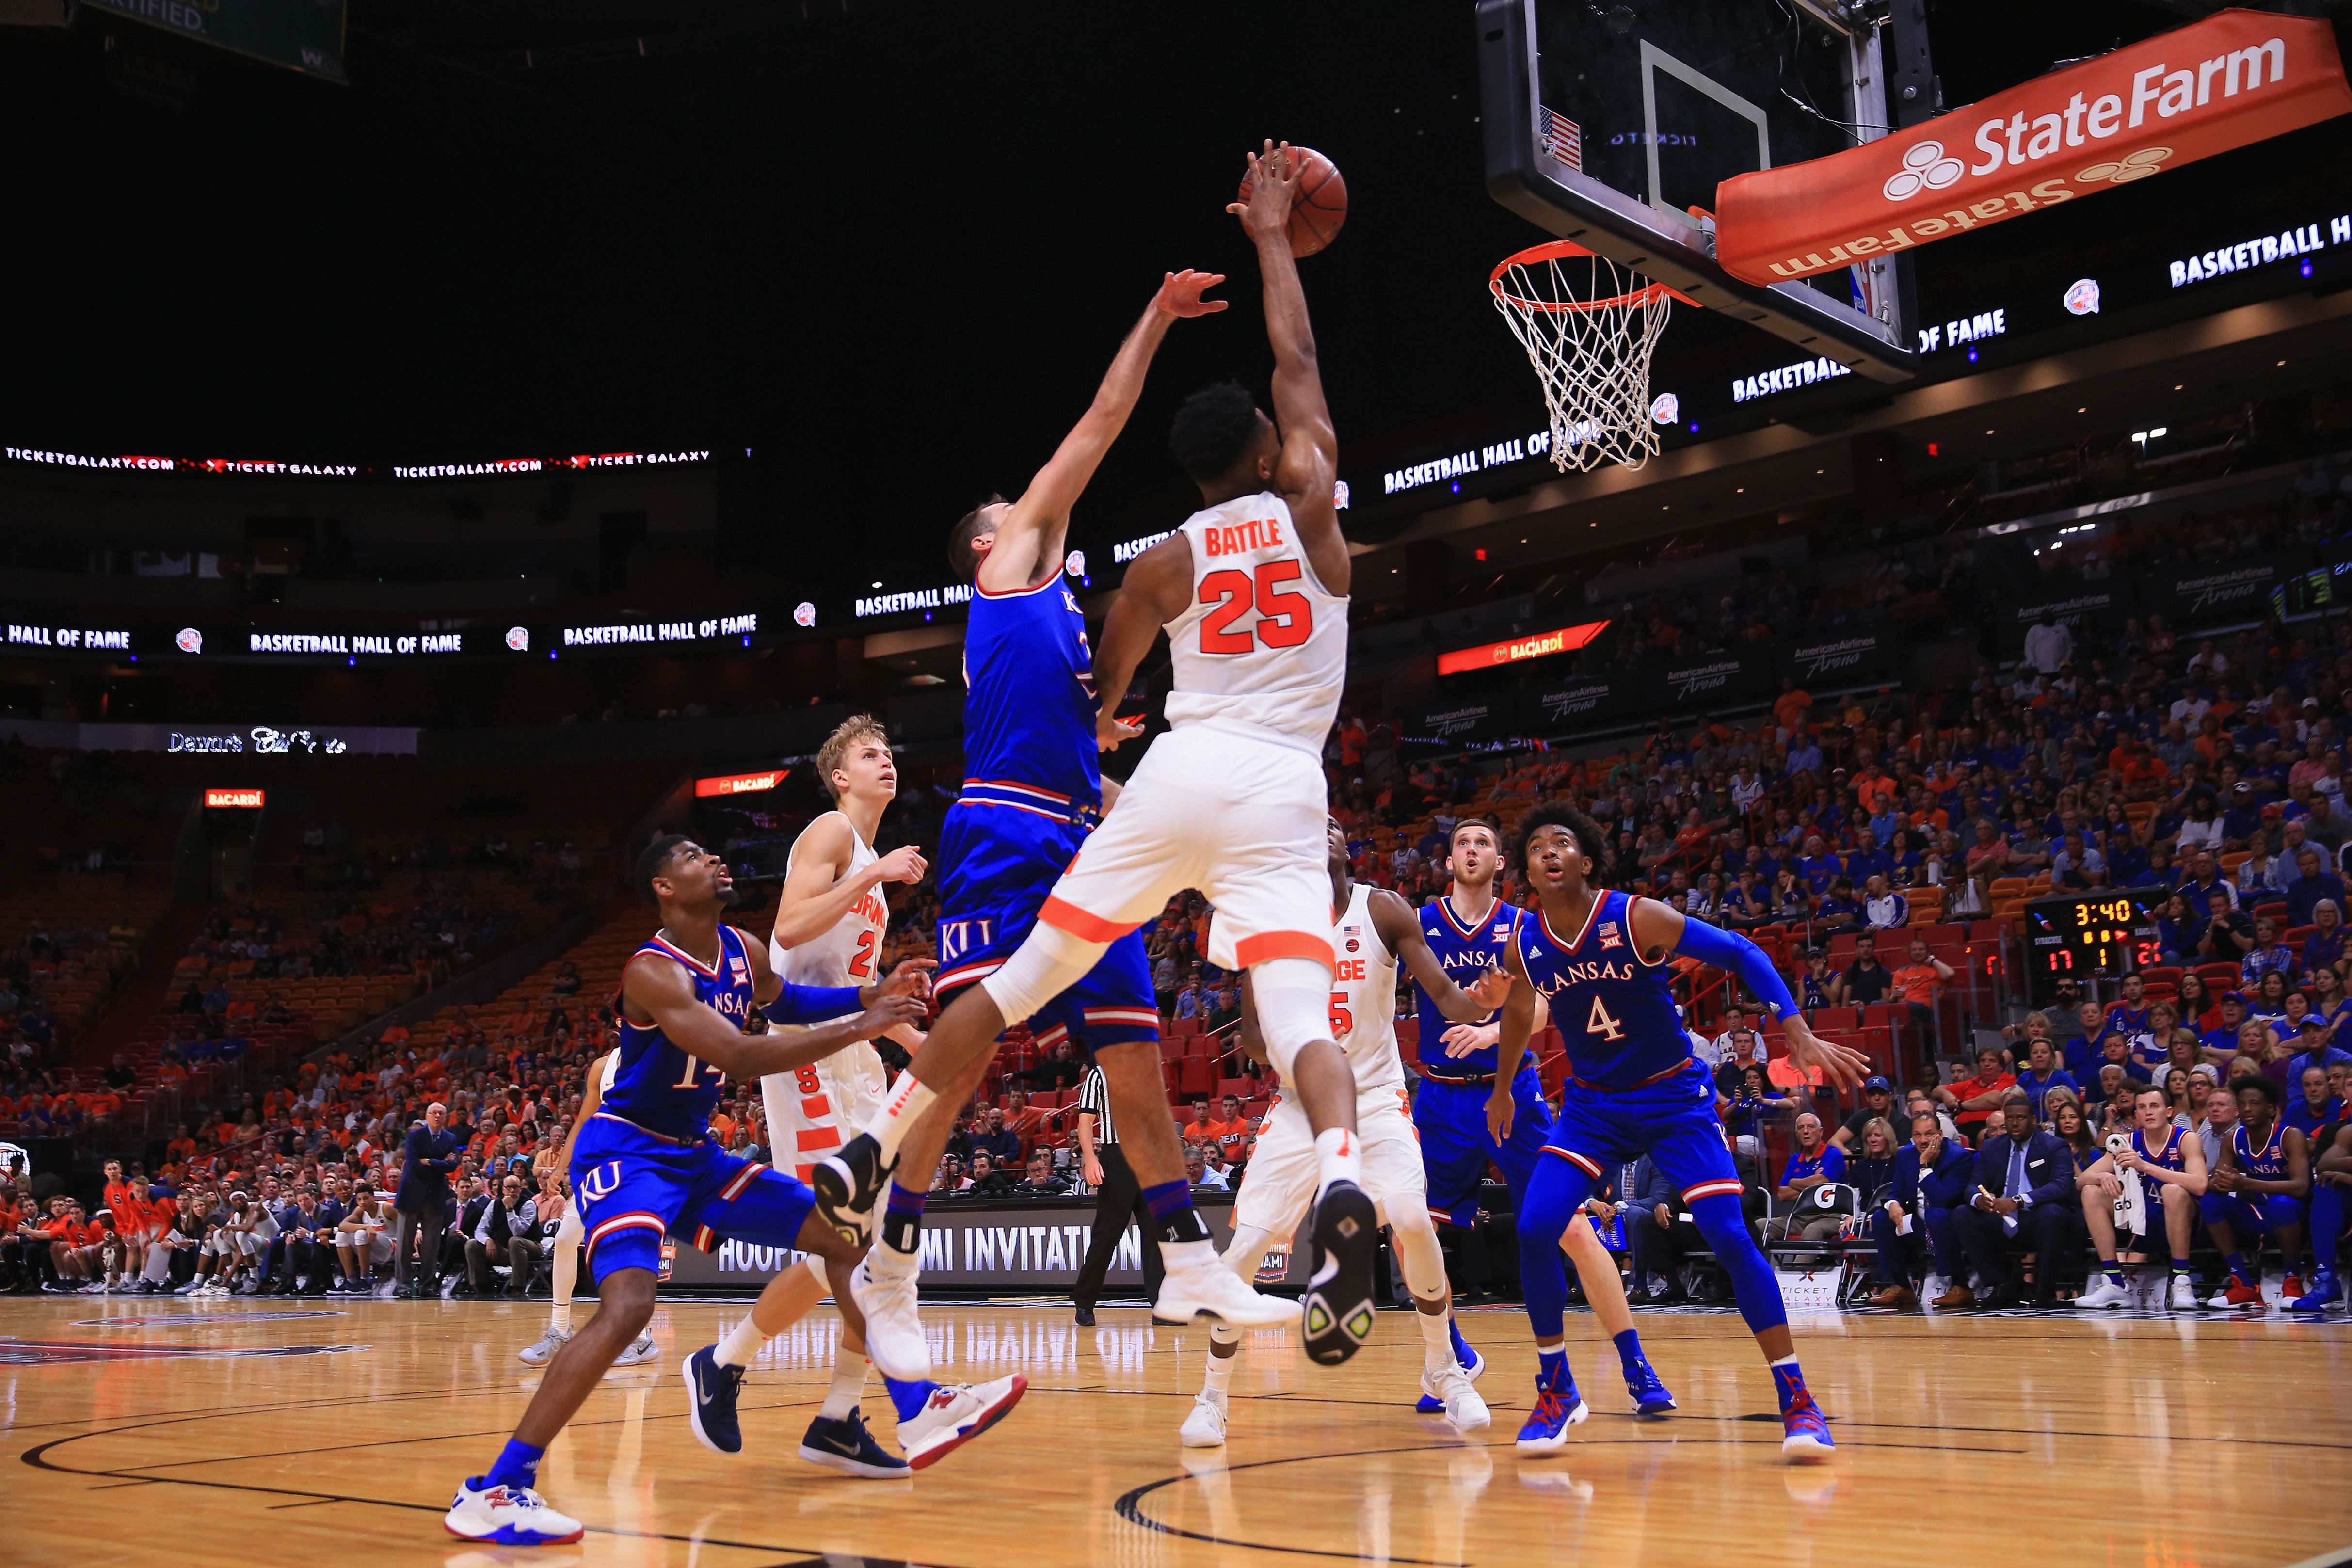 Don't Be Fooled By Saturday's Loss, Syracuse Basketball is Back